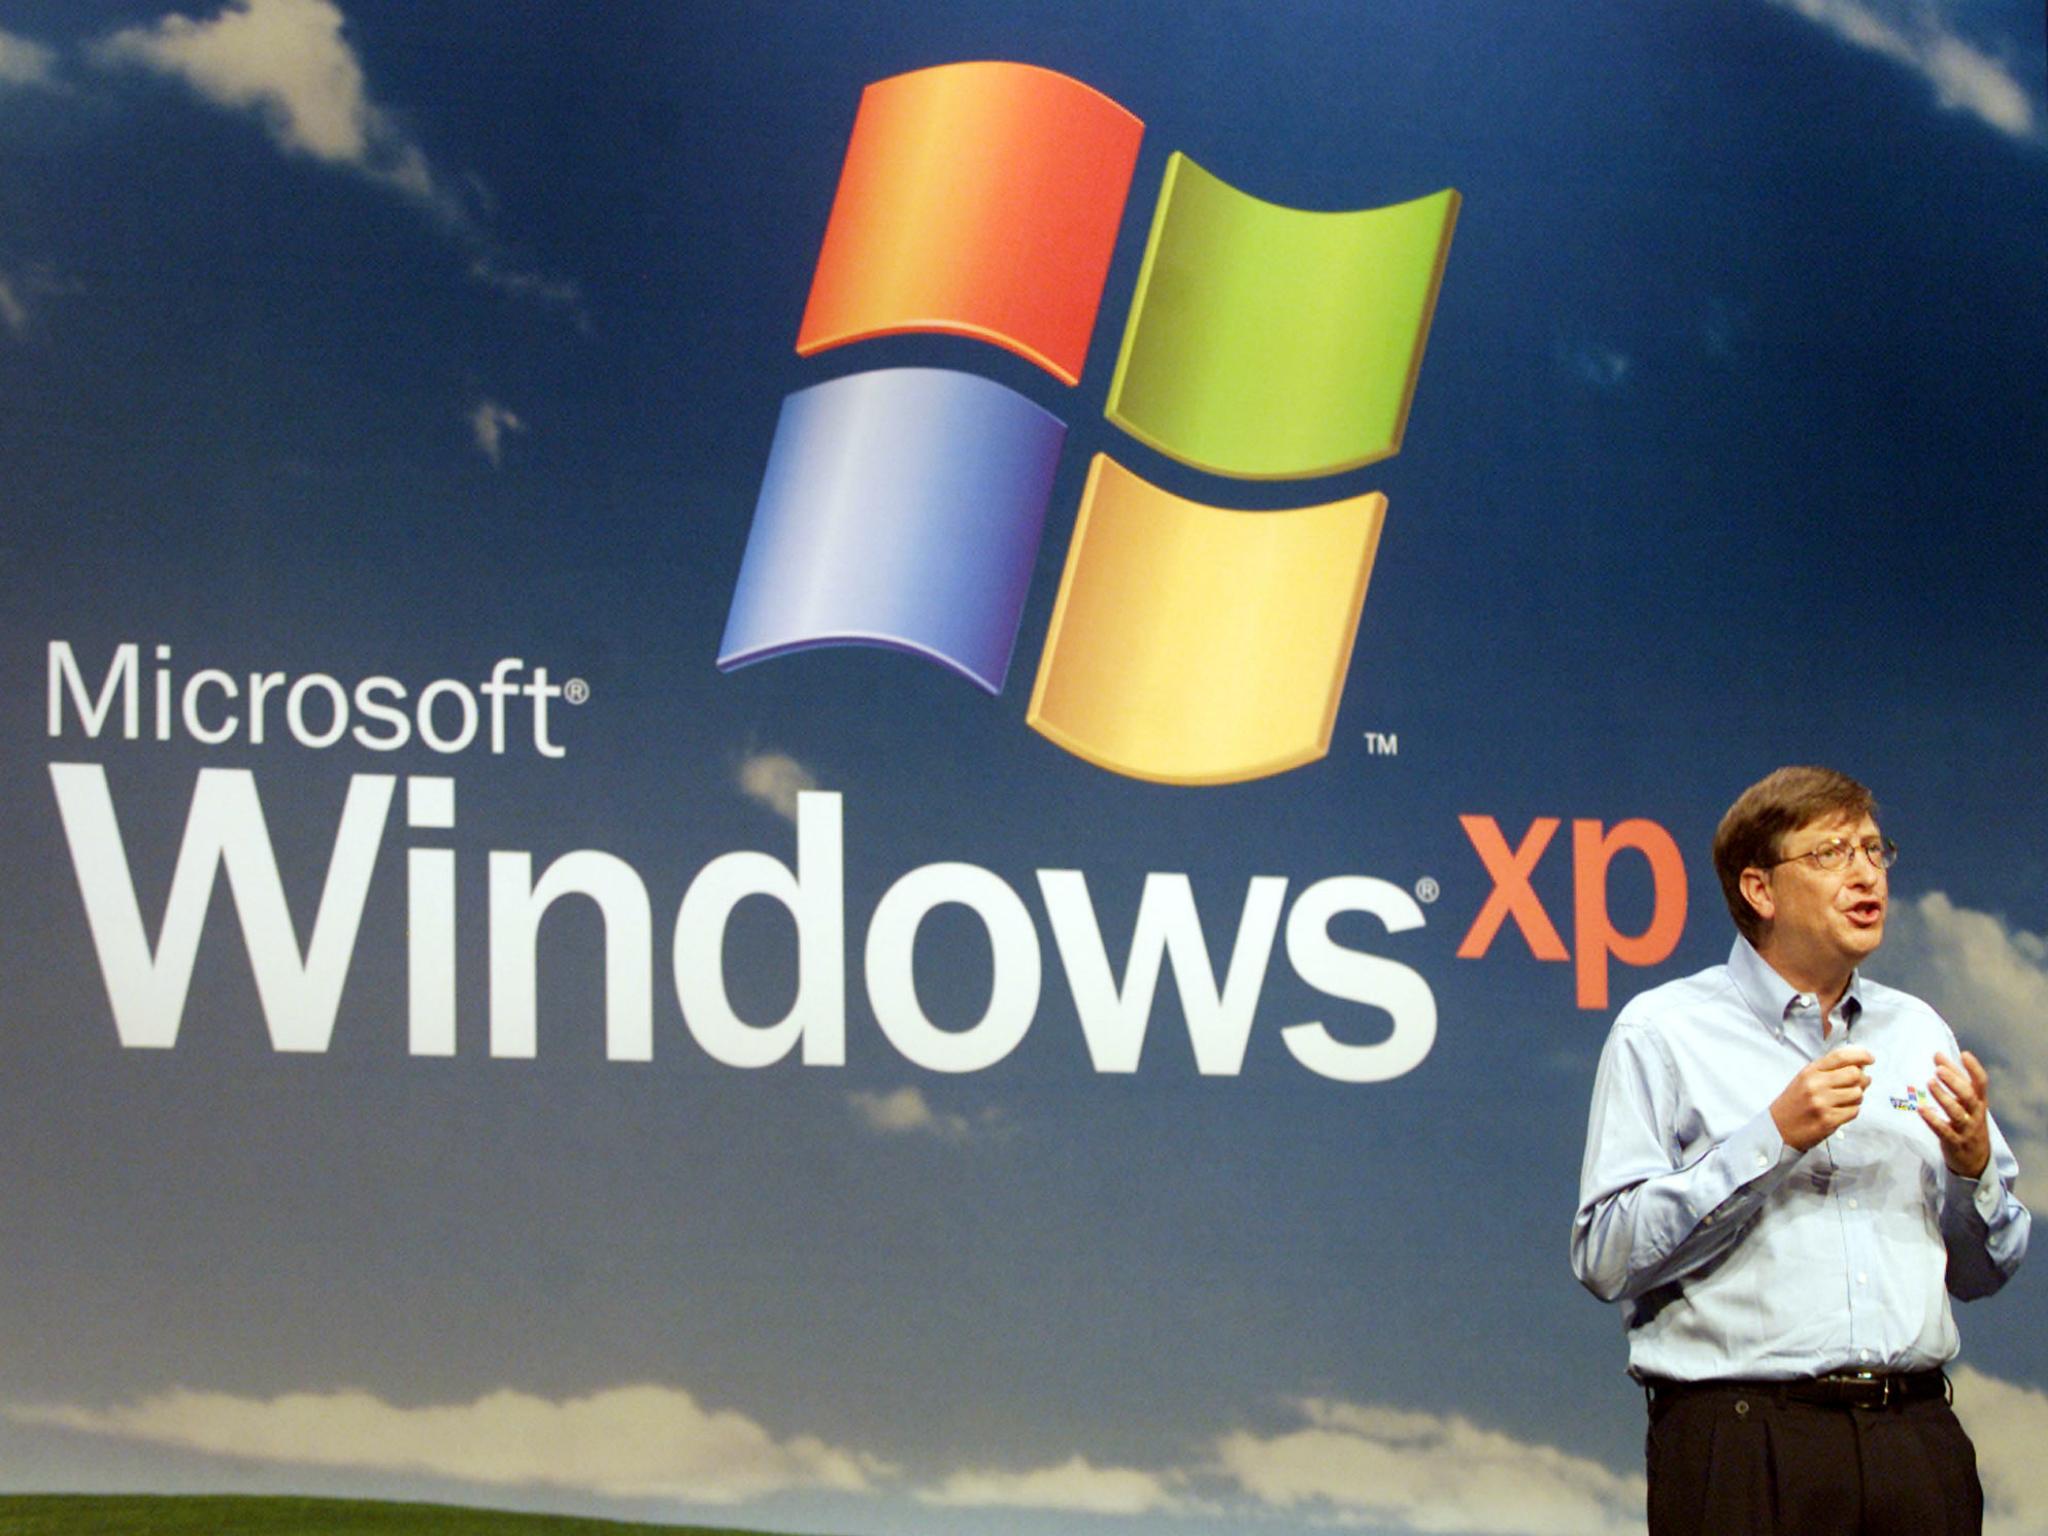 Up to 90 per cent of NHS computers still run Windows XP, which came out in 2001